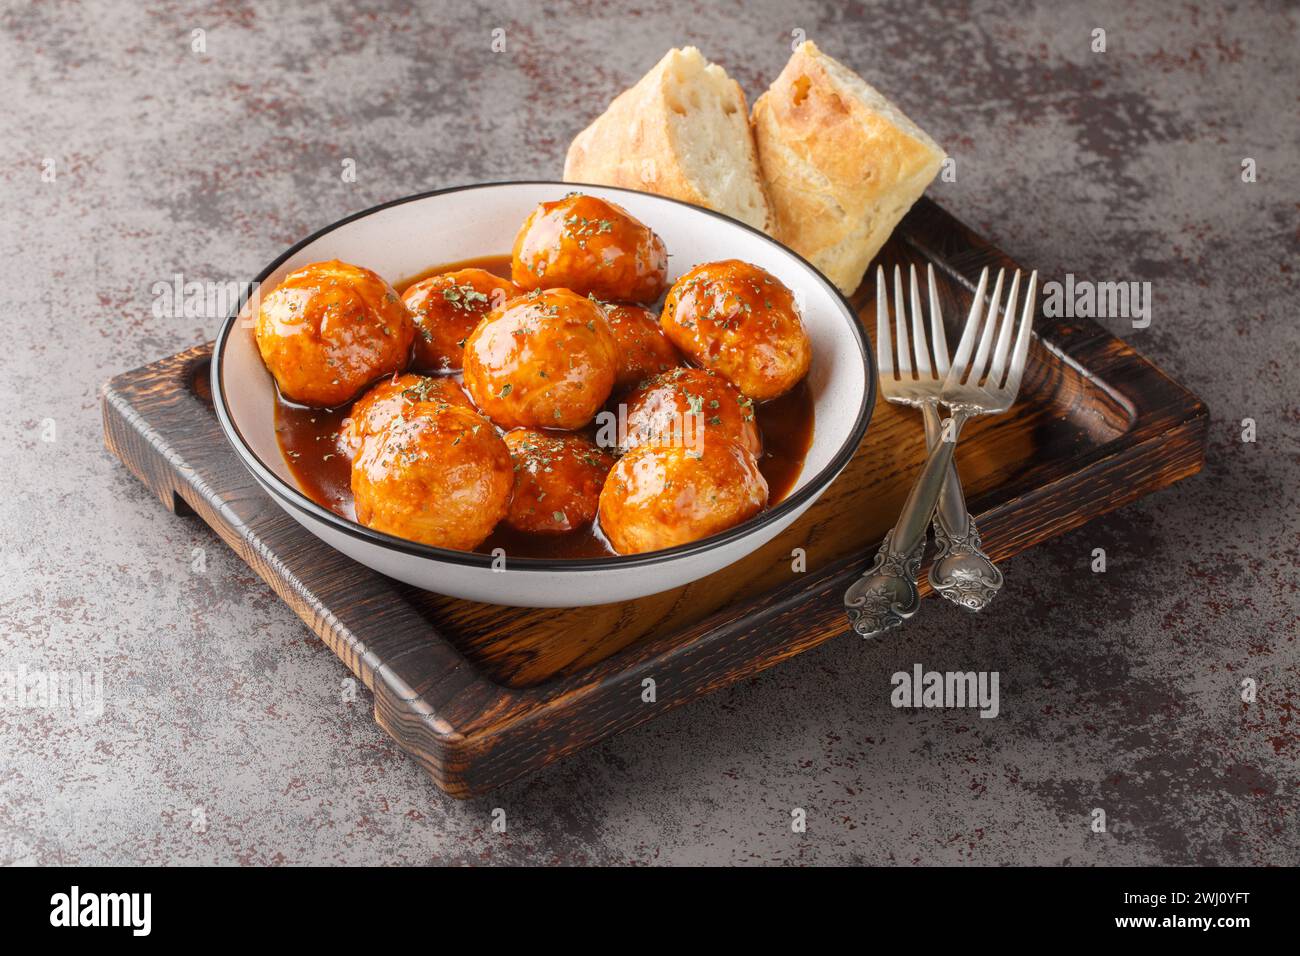 Spicy and sweet, chipotle honey glazed meatballs closeup on the bowl on the table. Horizontal Stock Photo